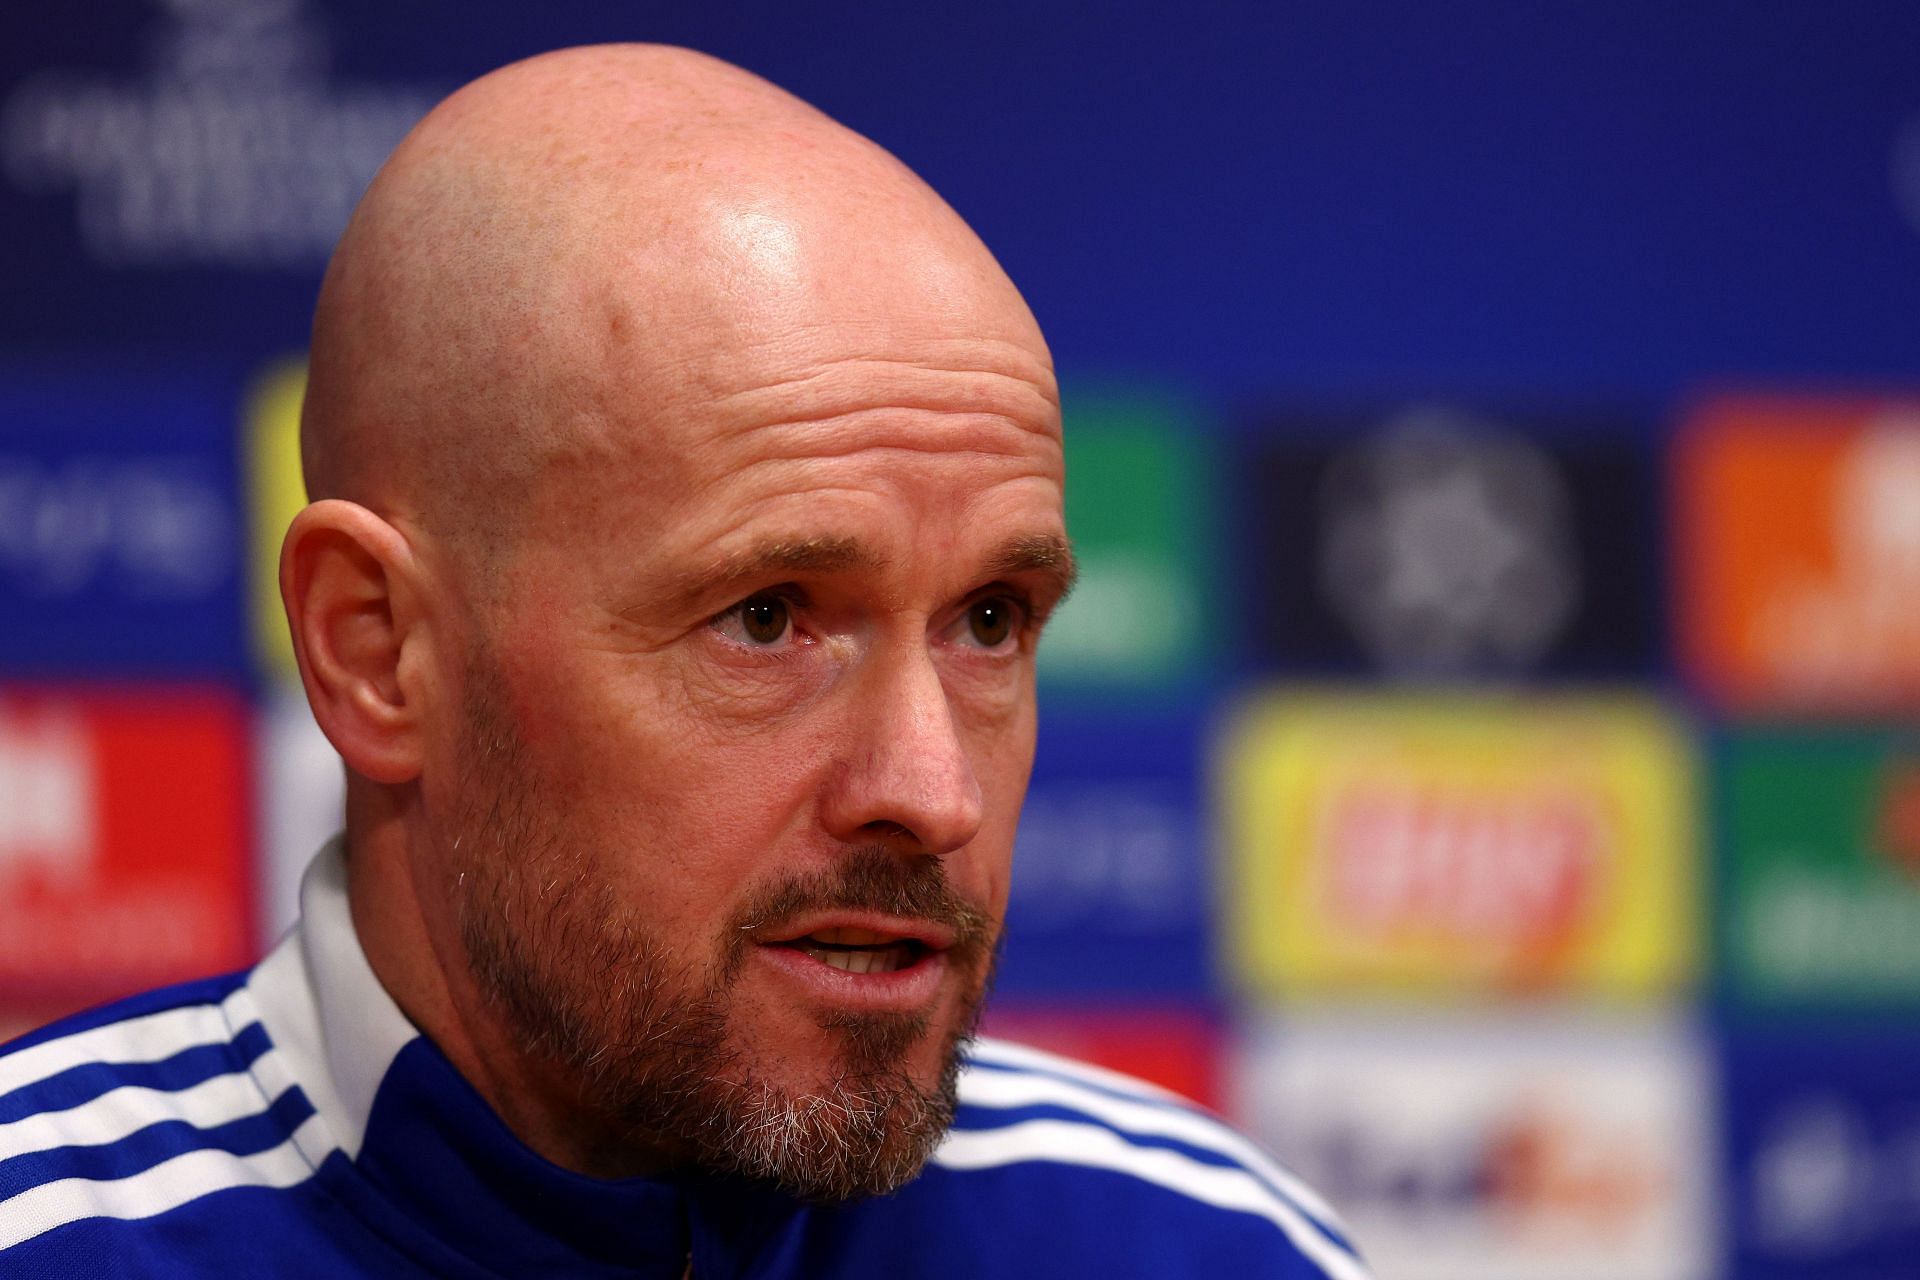 Erik ten Hag will take over at Manchester United in the summer.